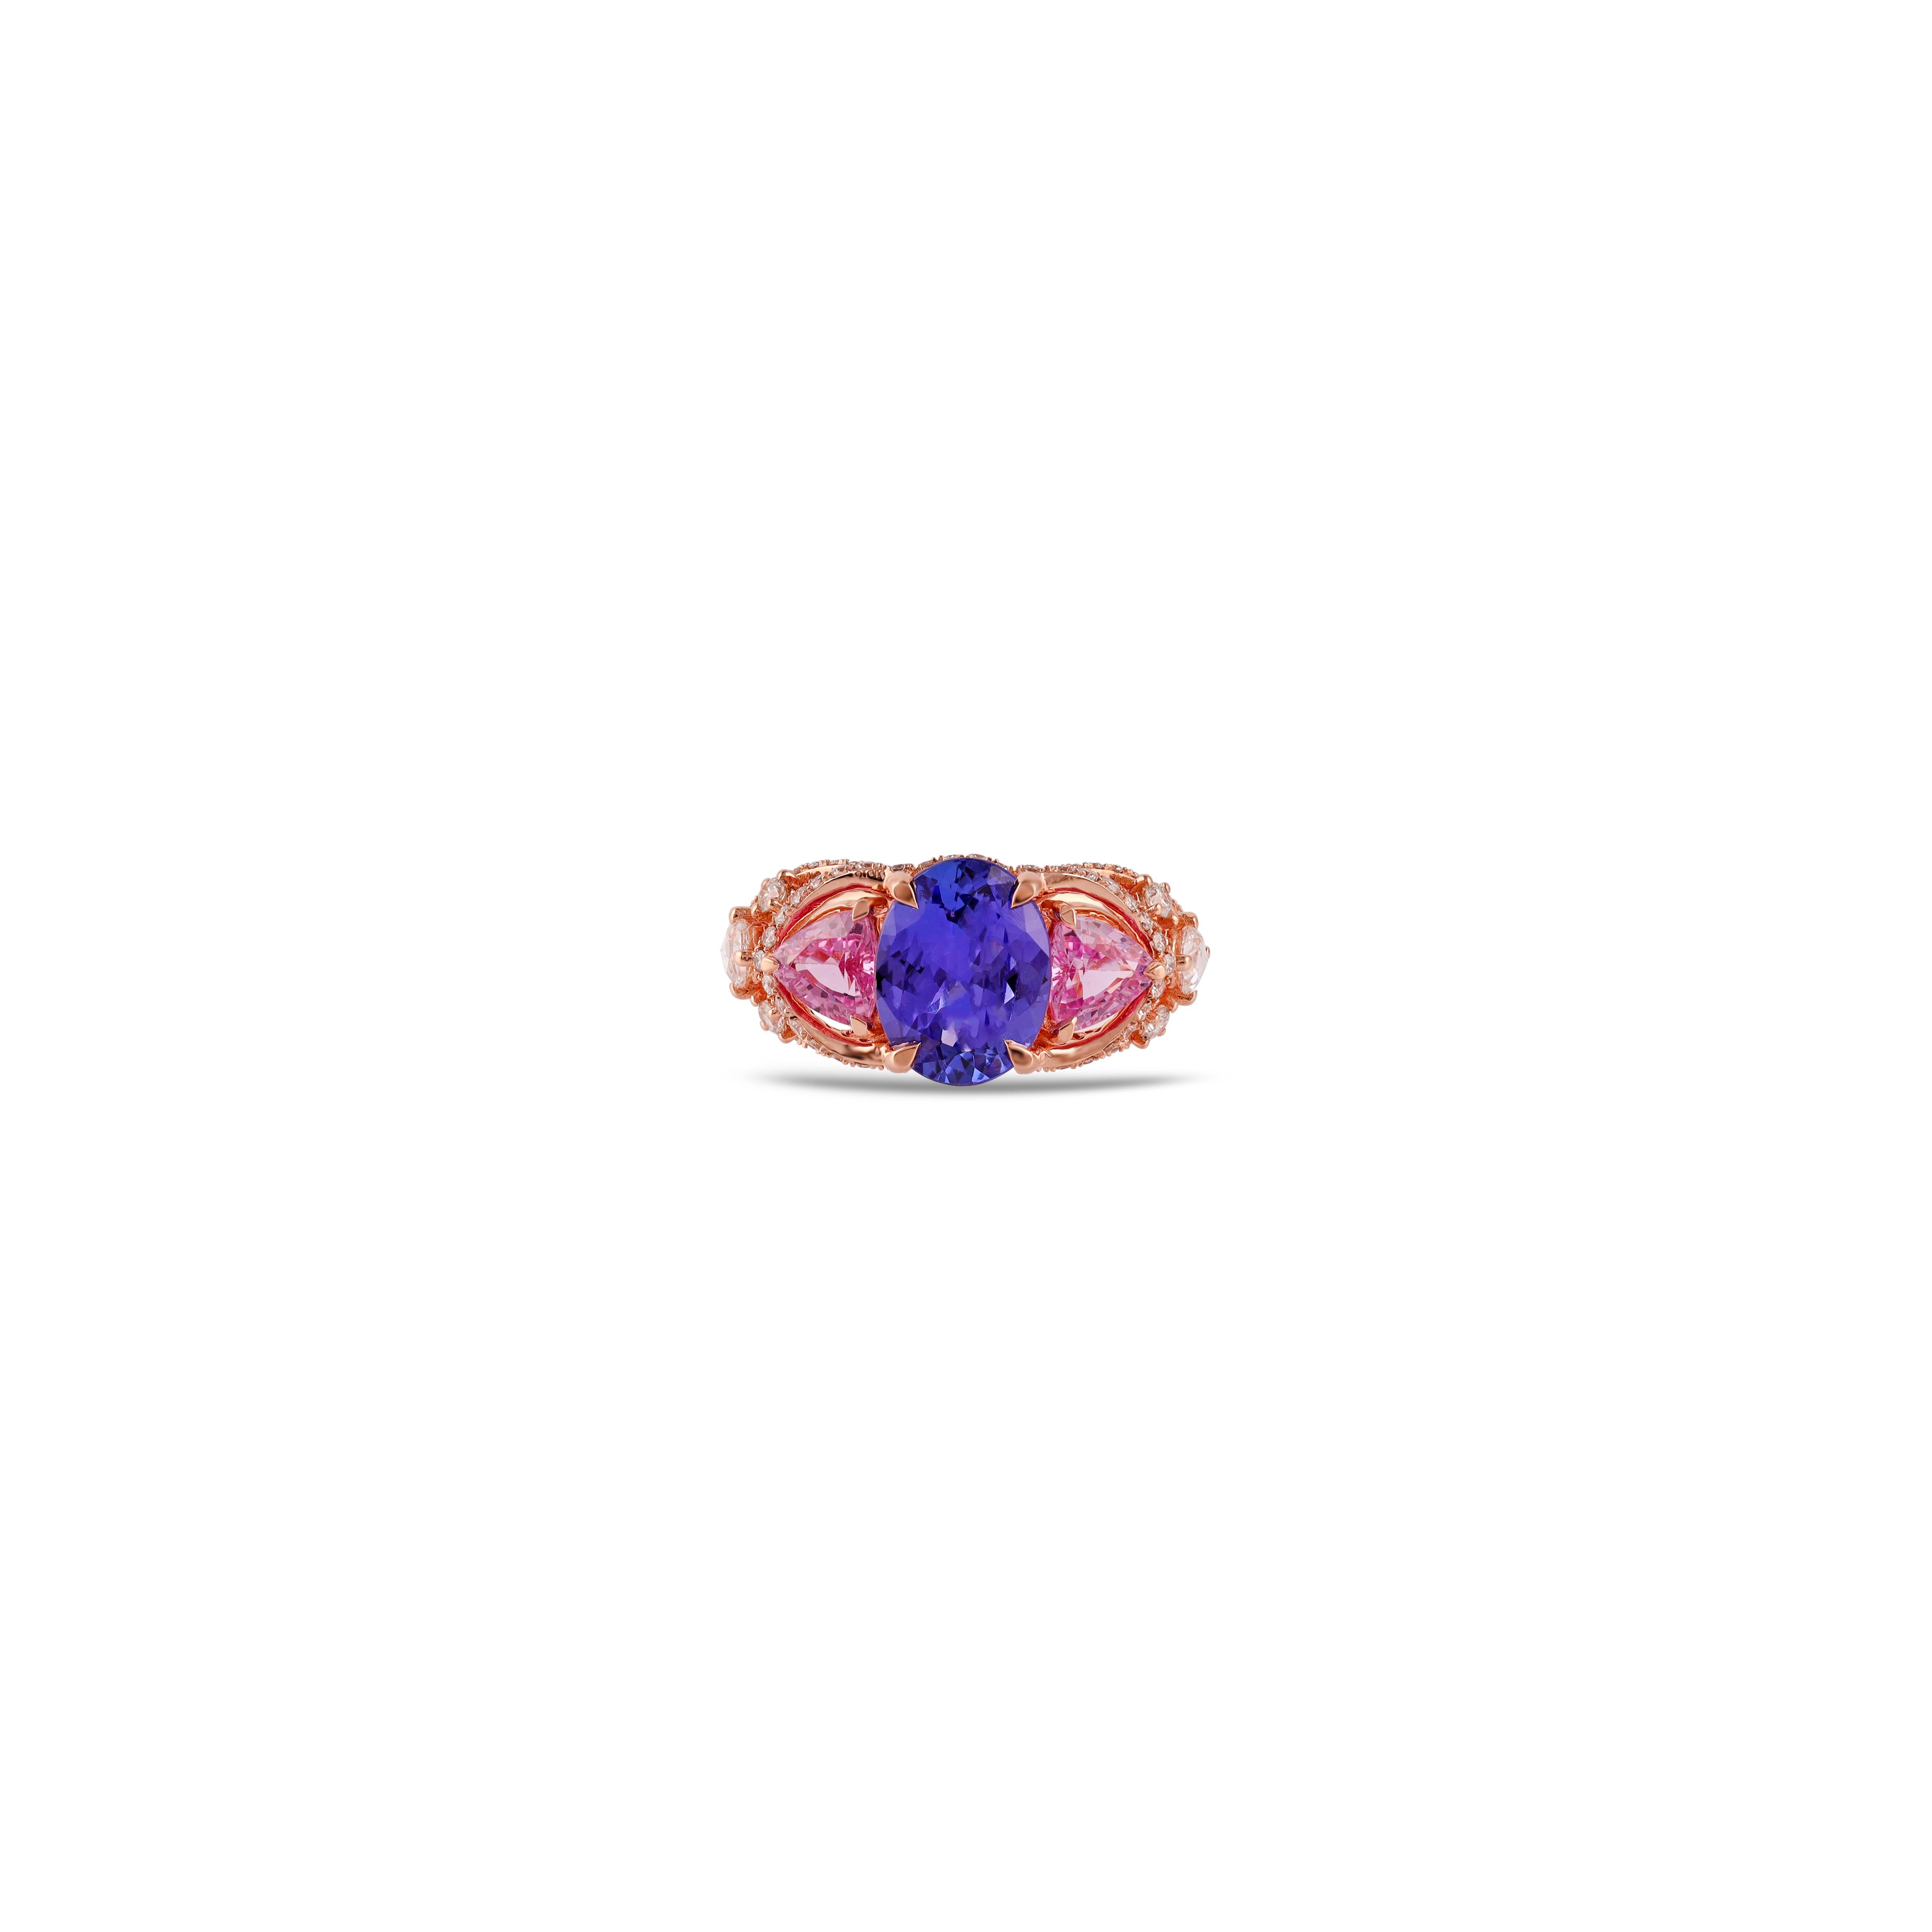 Tanzanite = 2.31 Carat
Sapphire = 1.21 Carats
Diamonds = 0.71 Carat

Ring Size: 8* US

*It can be resized complimentary Small 0r Bigger.
